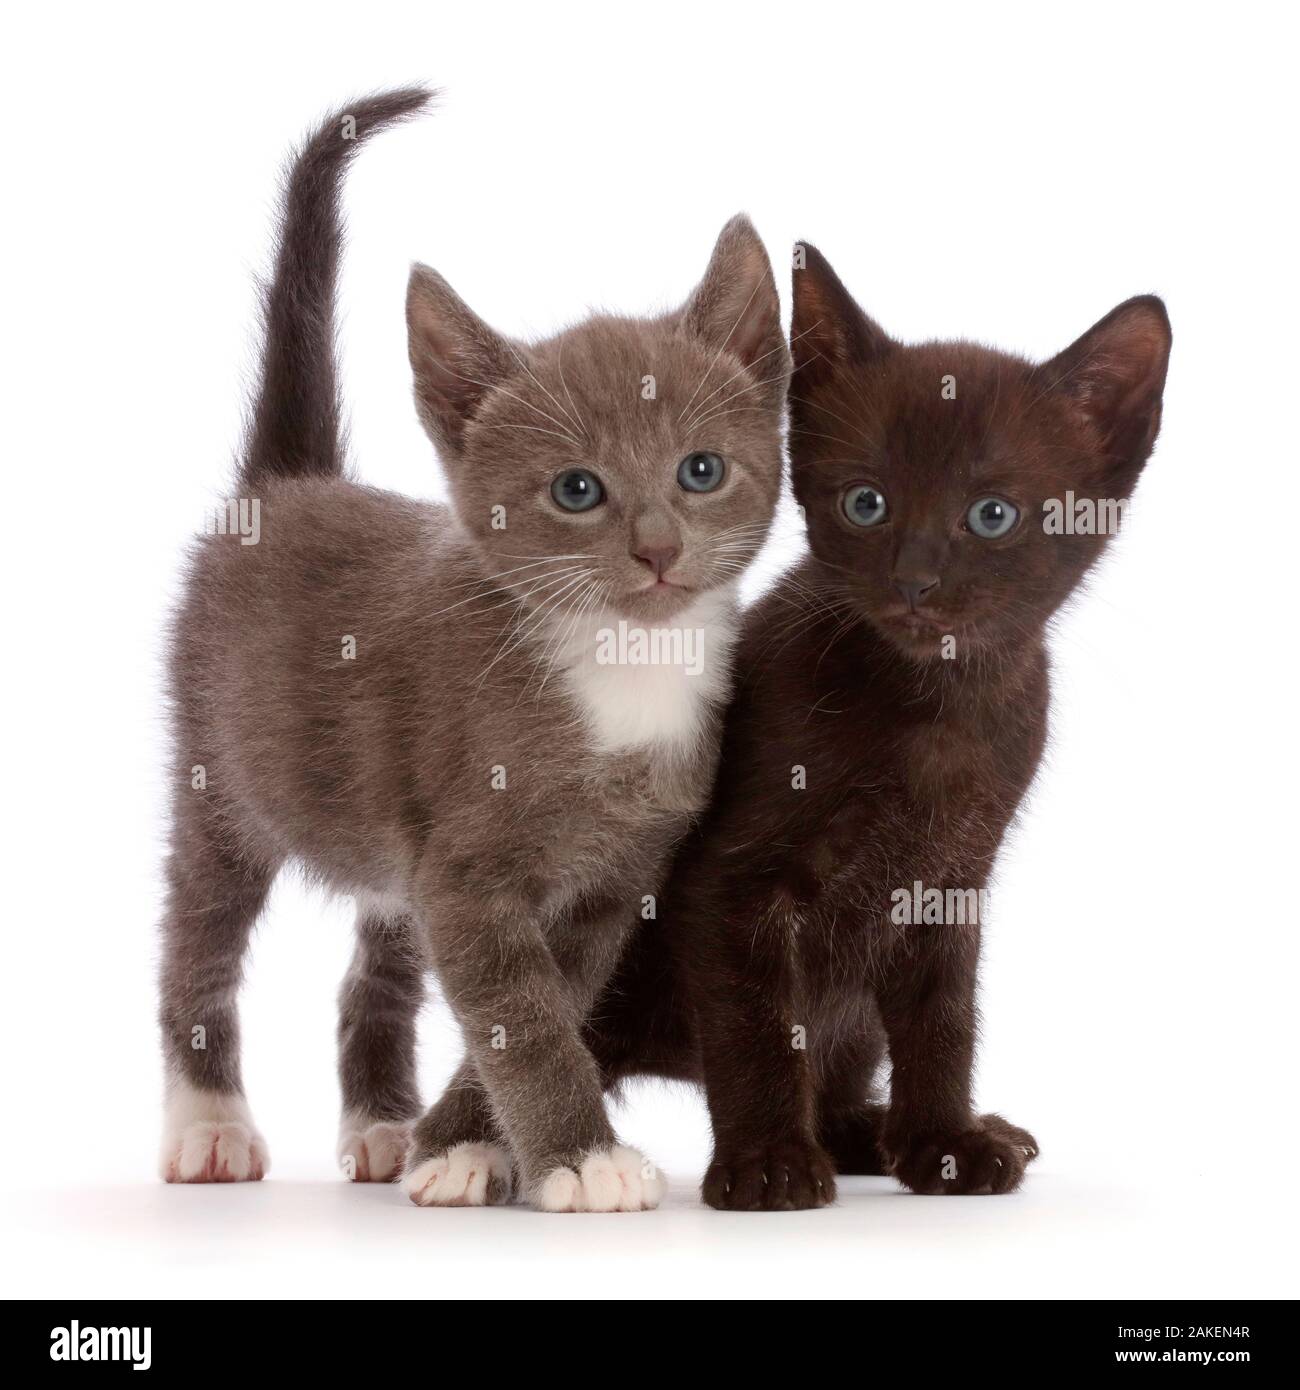 Blue-and-white and black kittens. Stock Photo